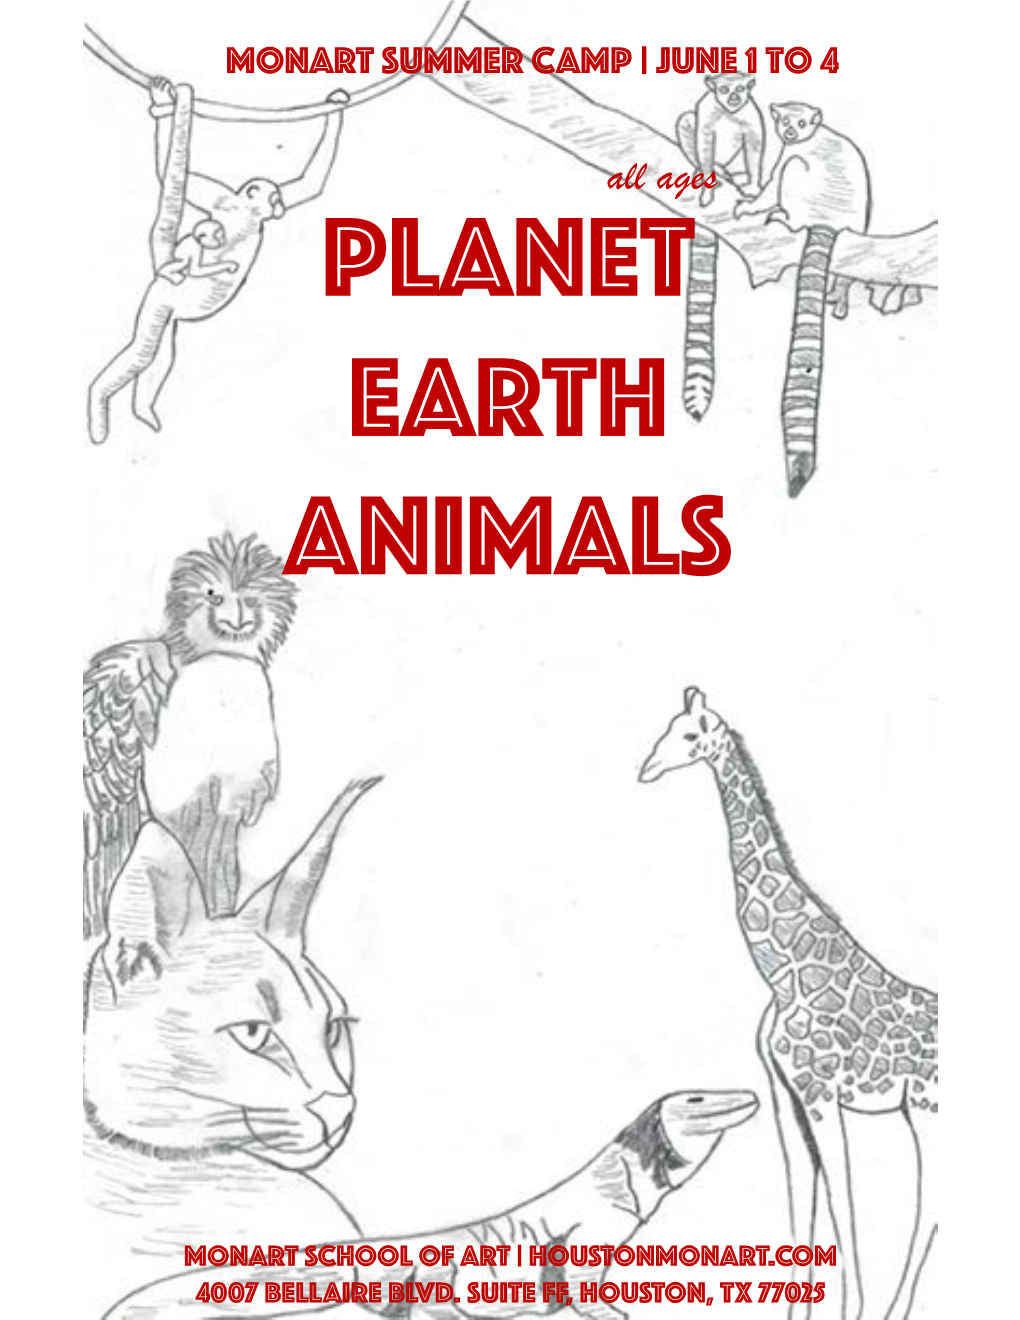 All Ages Planet Earth Animals